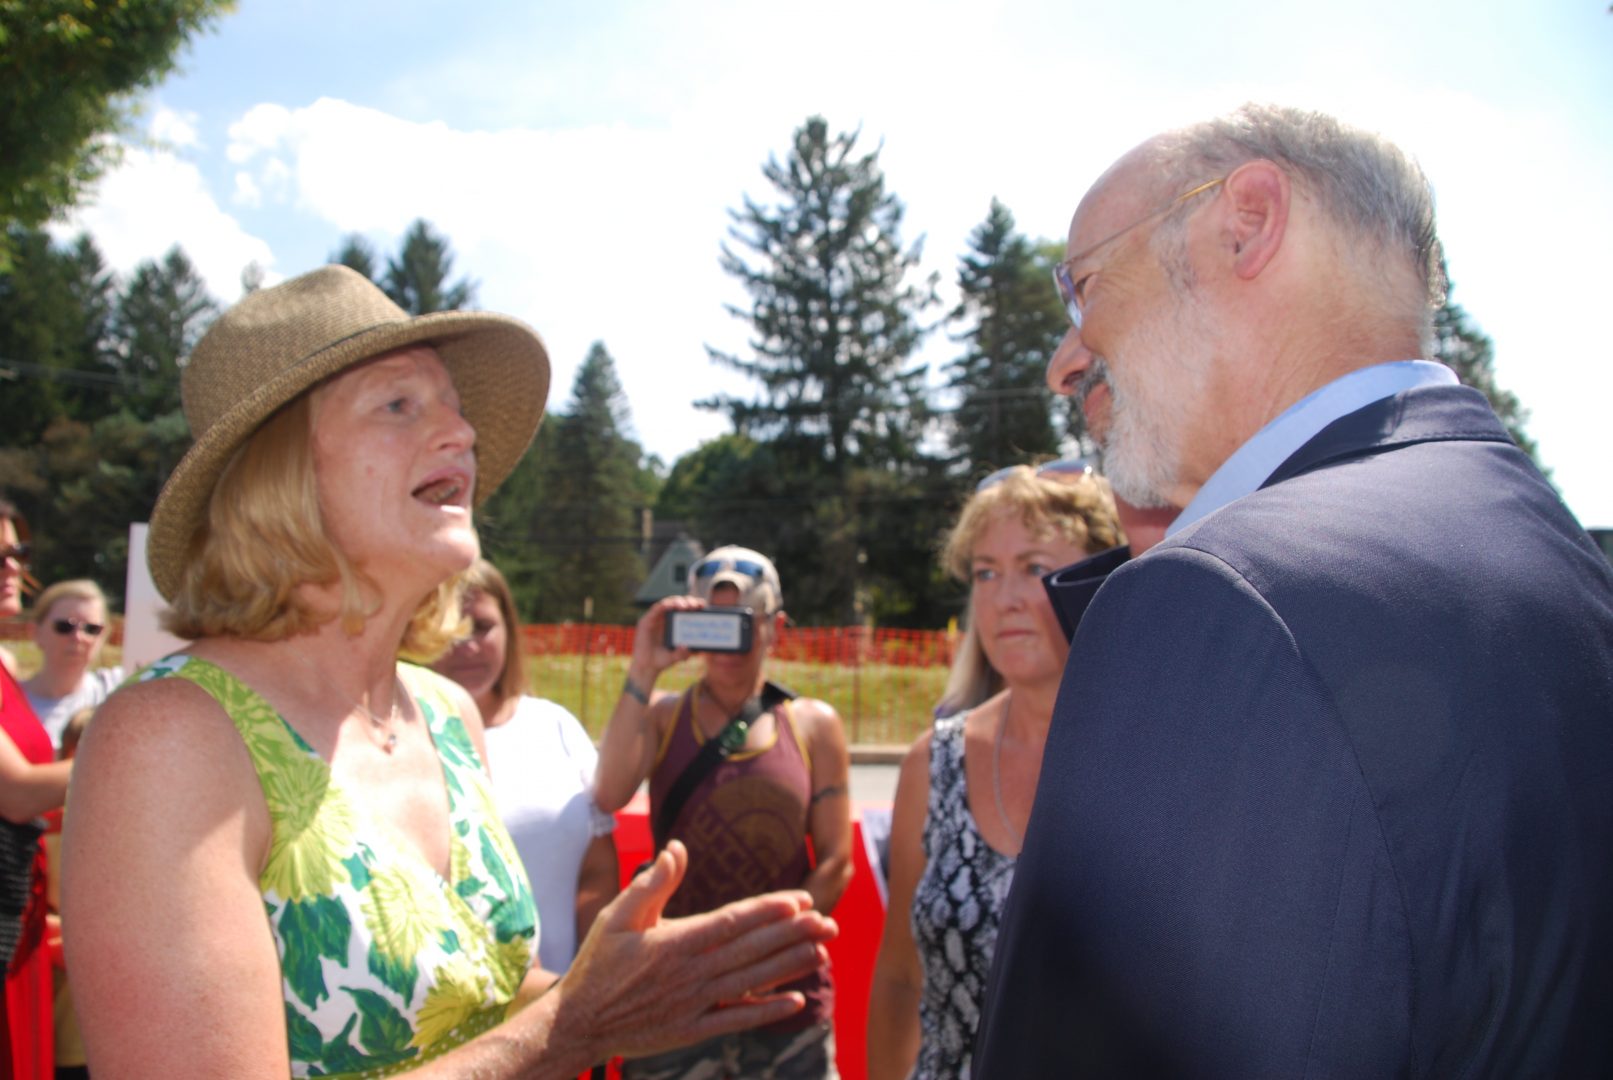 Ginny Kerslake, an anti-pipeline activist, urged Gov. Tom Wolf to halt construction of the Mariner East pipelines in this August 2019 photo. Wolf said no.